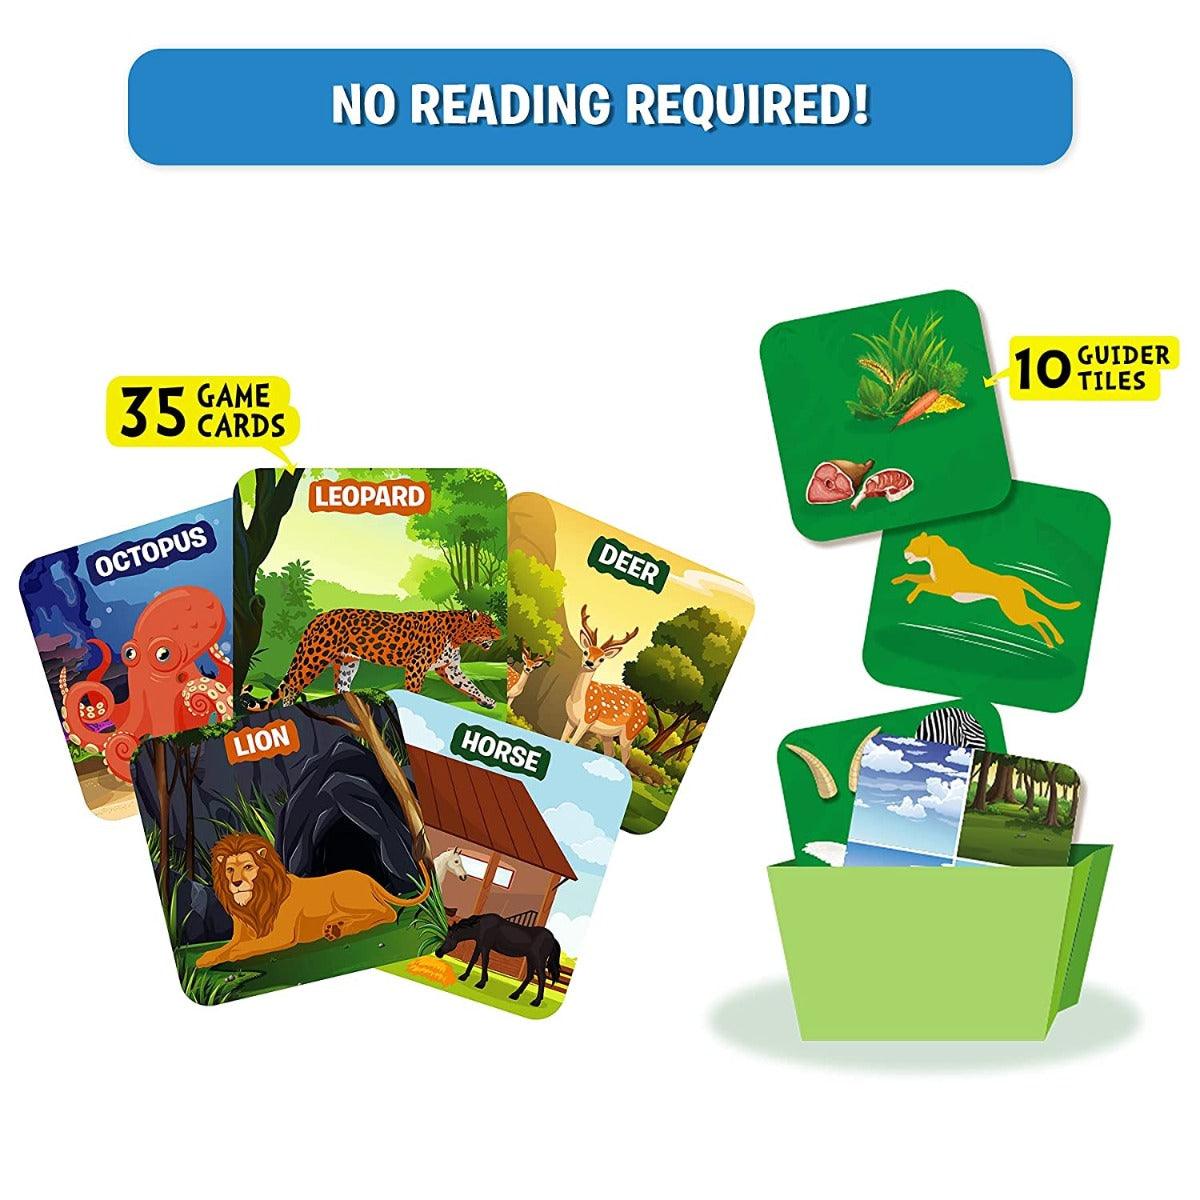 Skillmatics Guess in 10 Junior World of Animals - Card Game for Ages 3-6 Years